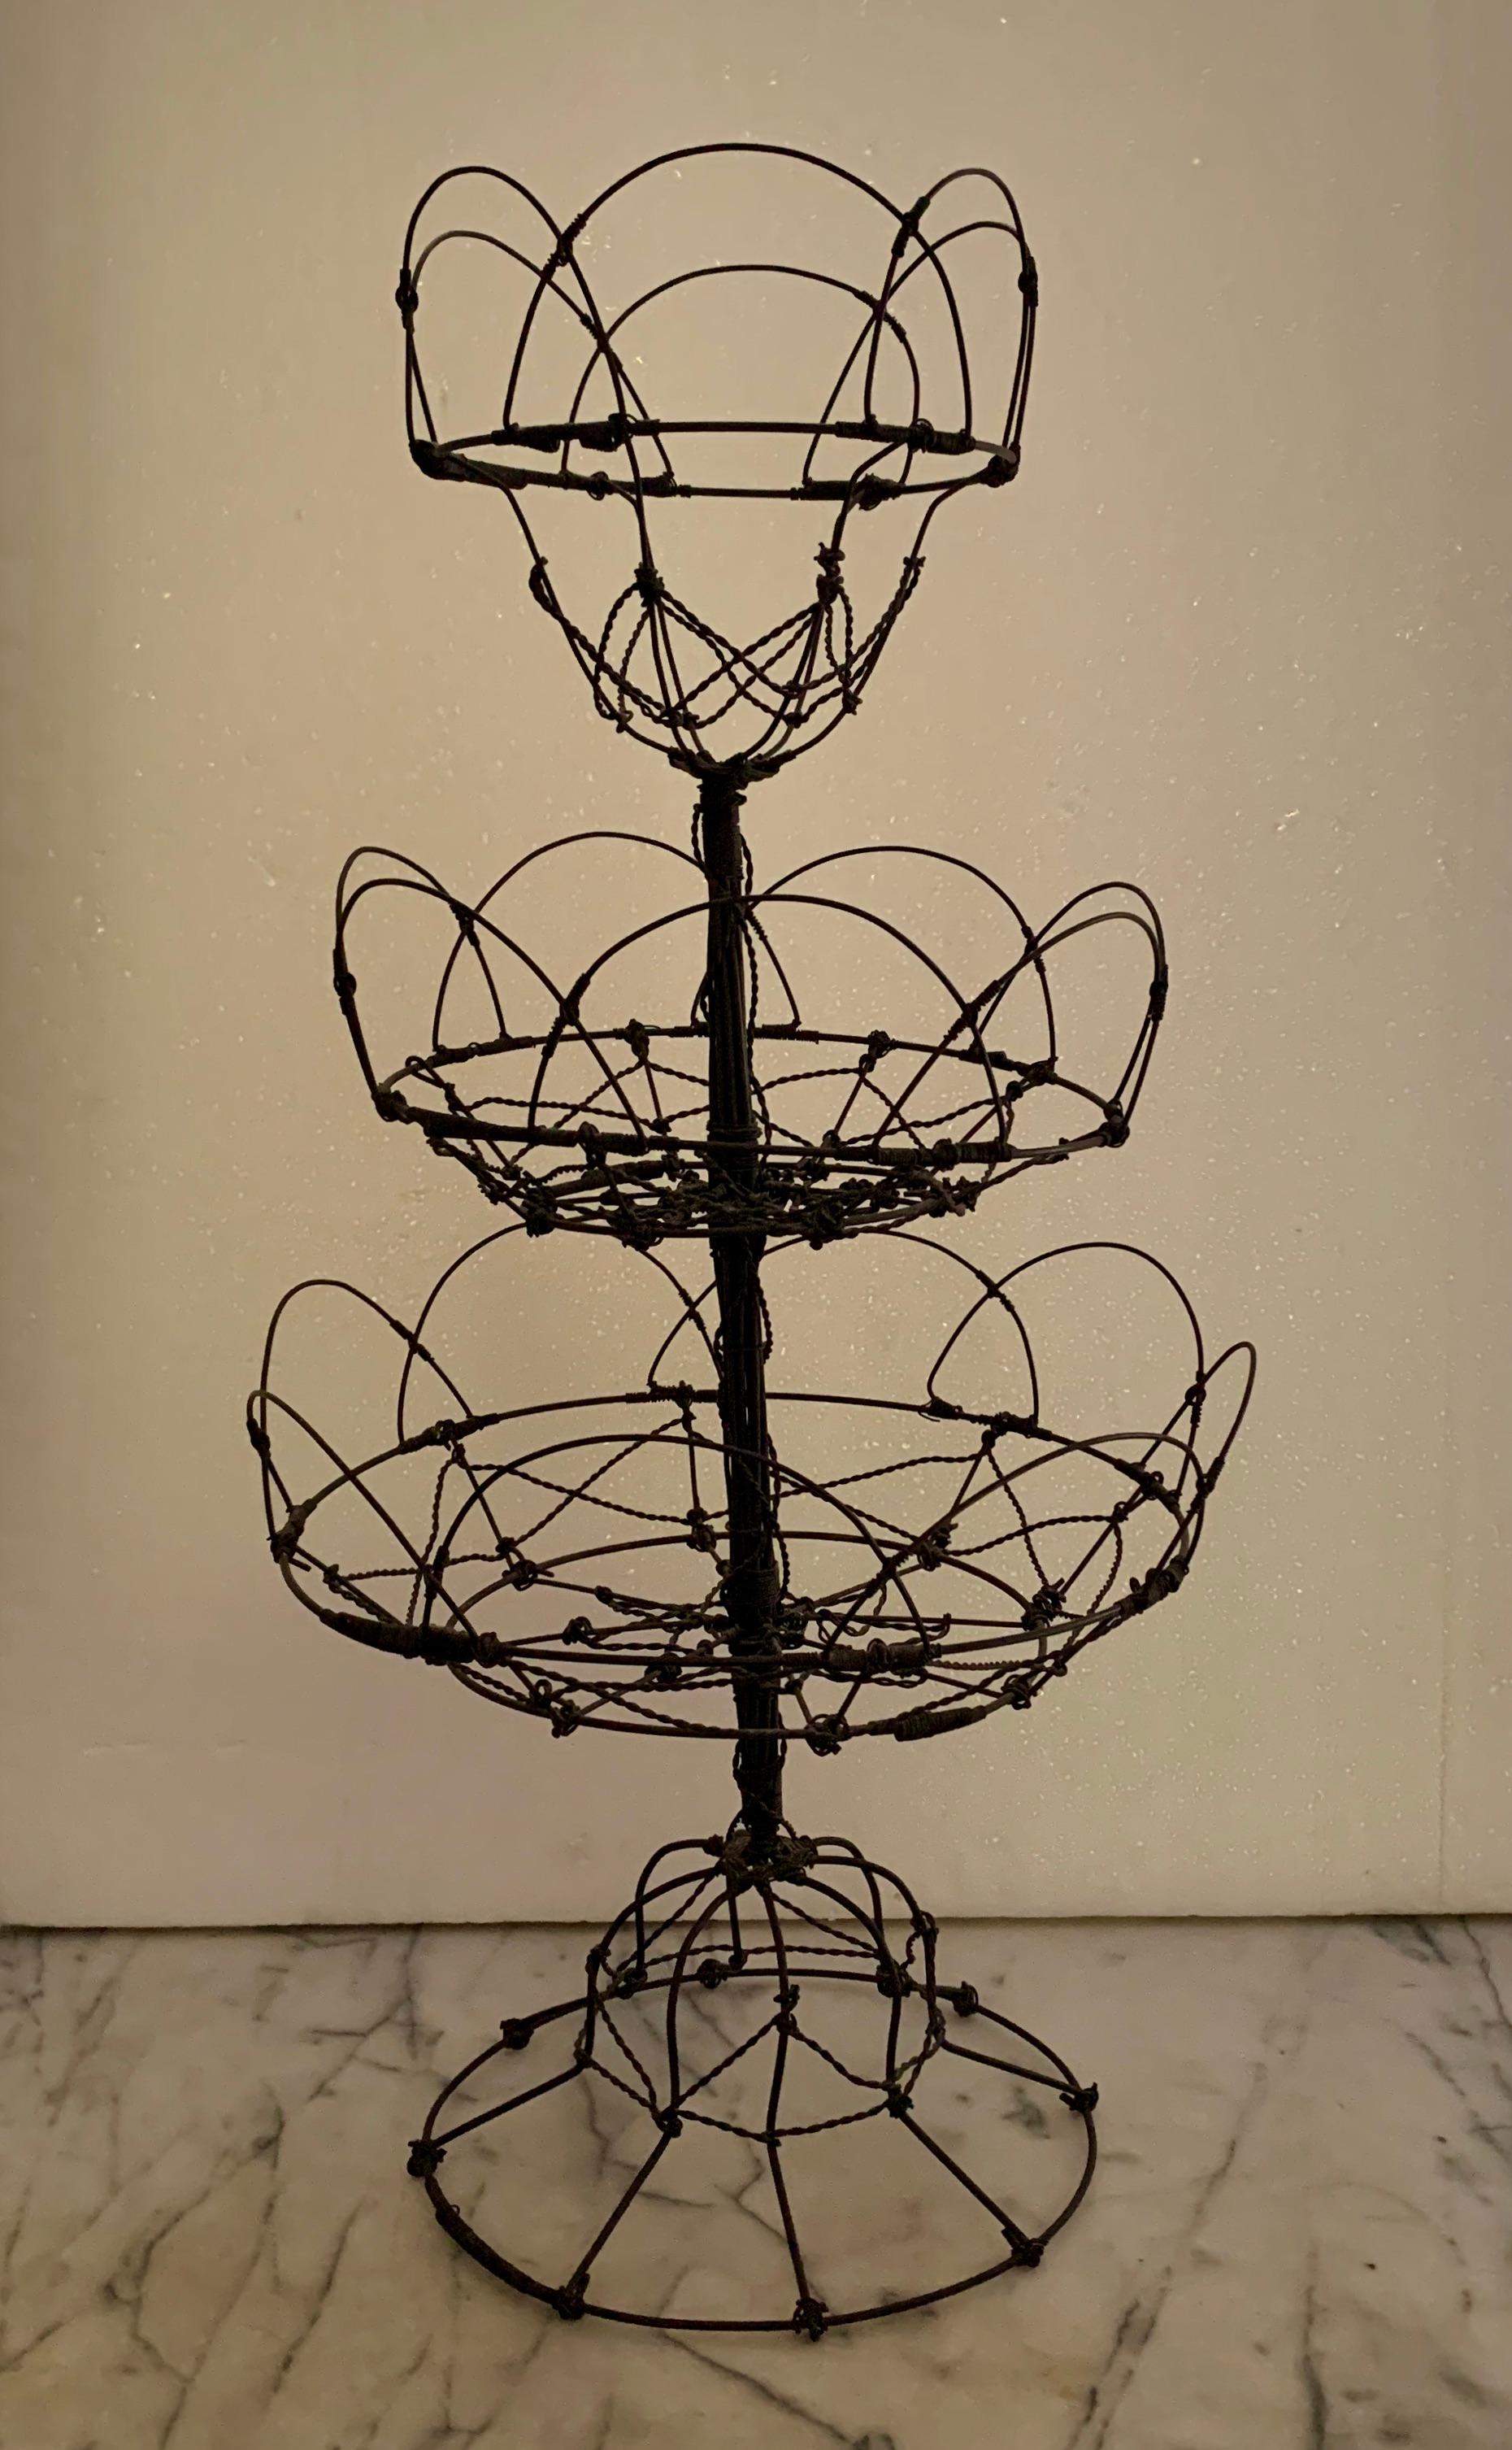 From France, circa 1890-1910, a triple-tiered, twisted wire standing basket, two and a half feet tall!

The most incredible one I’ve handled – amazing as a table-center, shop display, or on a kitchen countertop used as originally intended